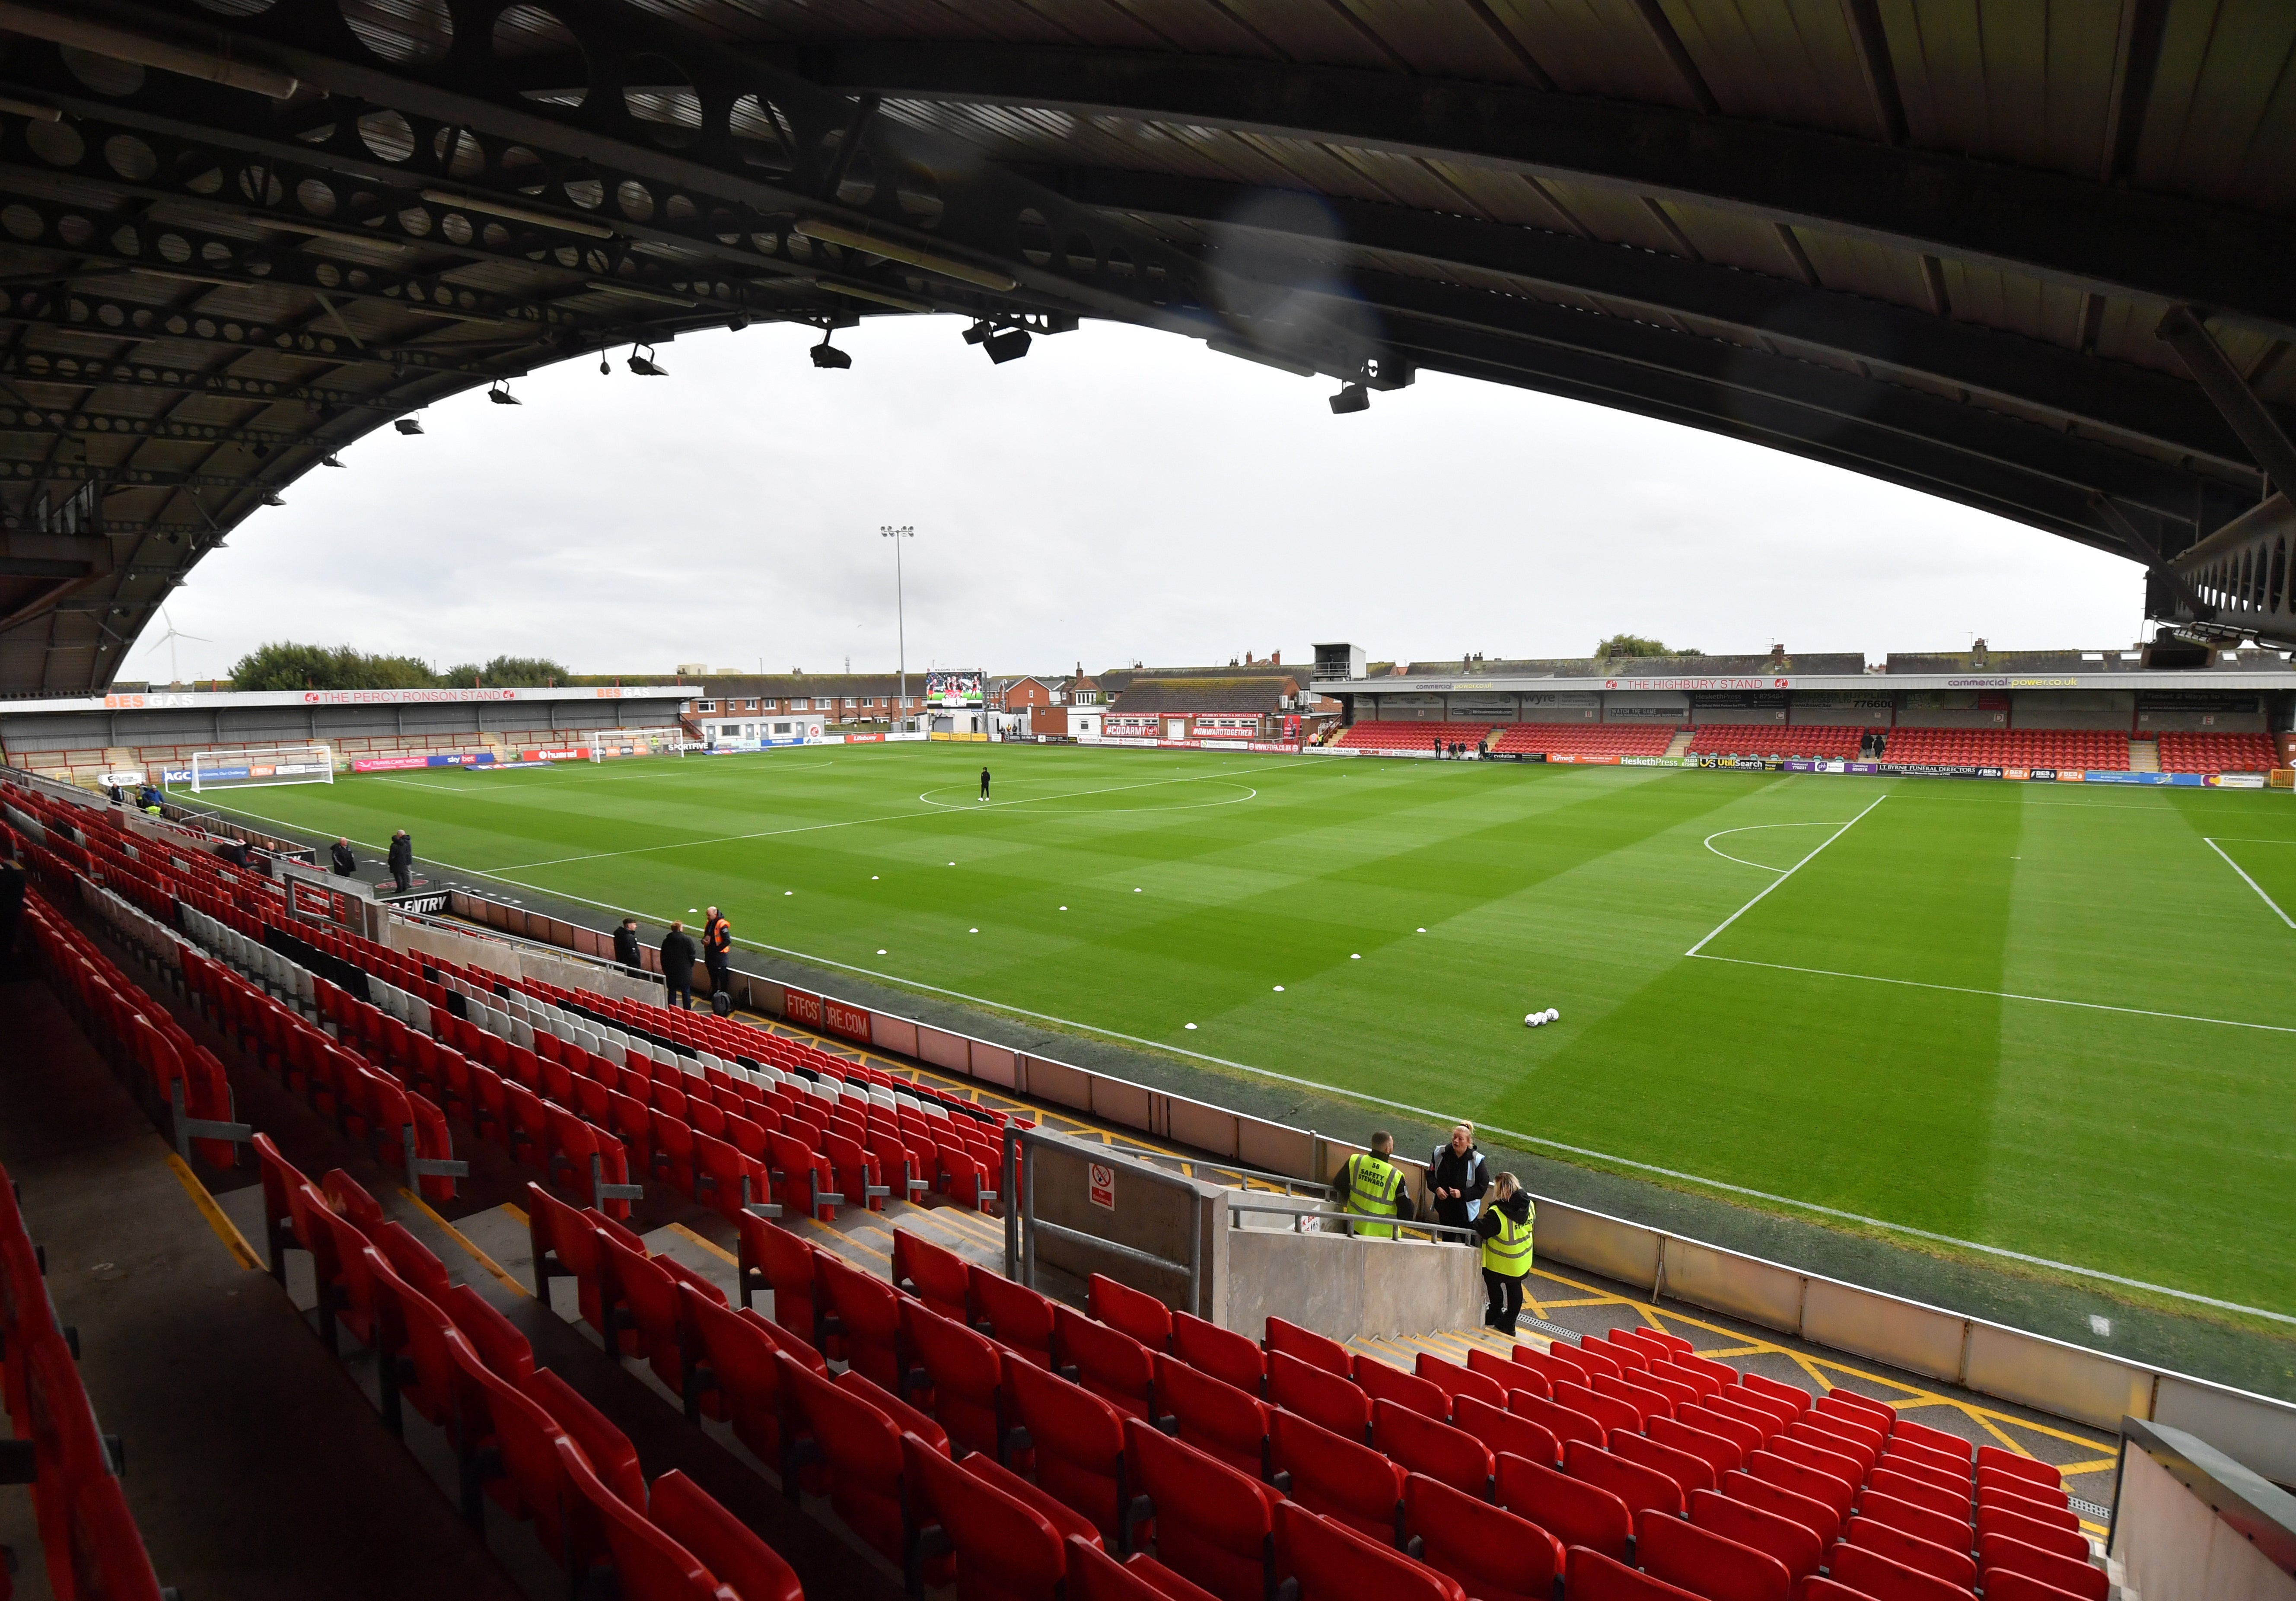 Fleetwood’s fixture with Sheffield Wednesday on Tuesday evening has been postponed due to storm damage